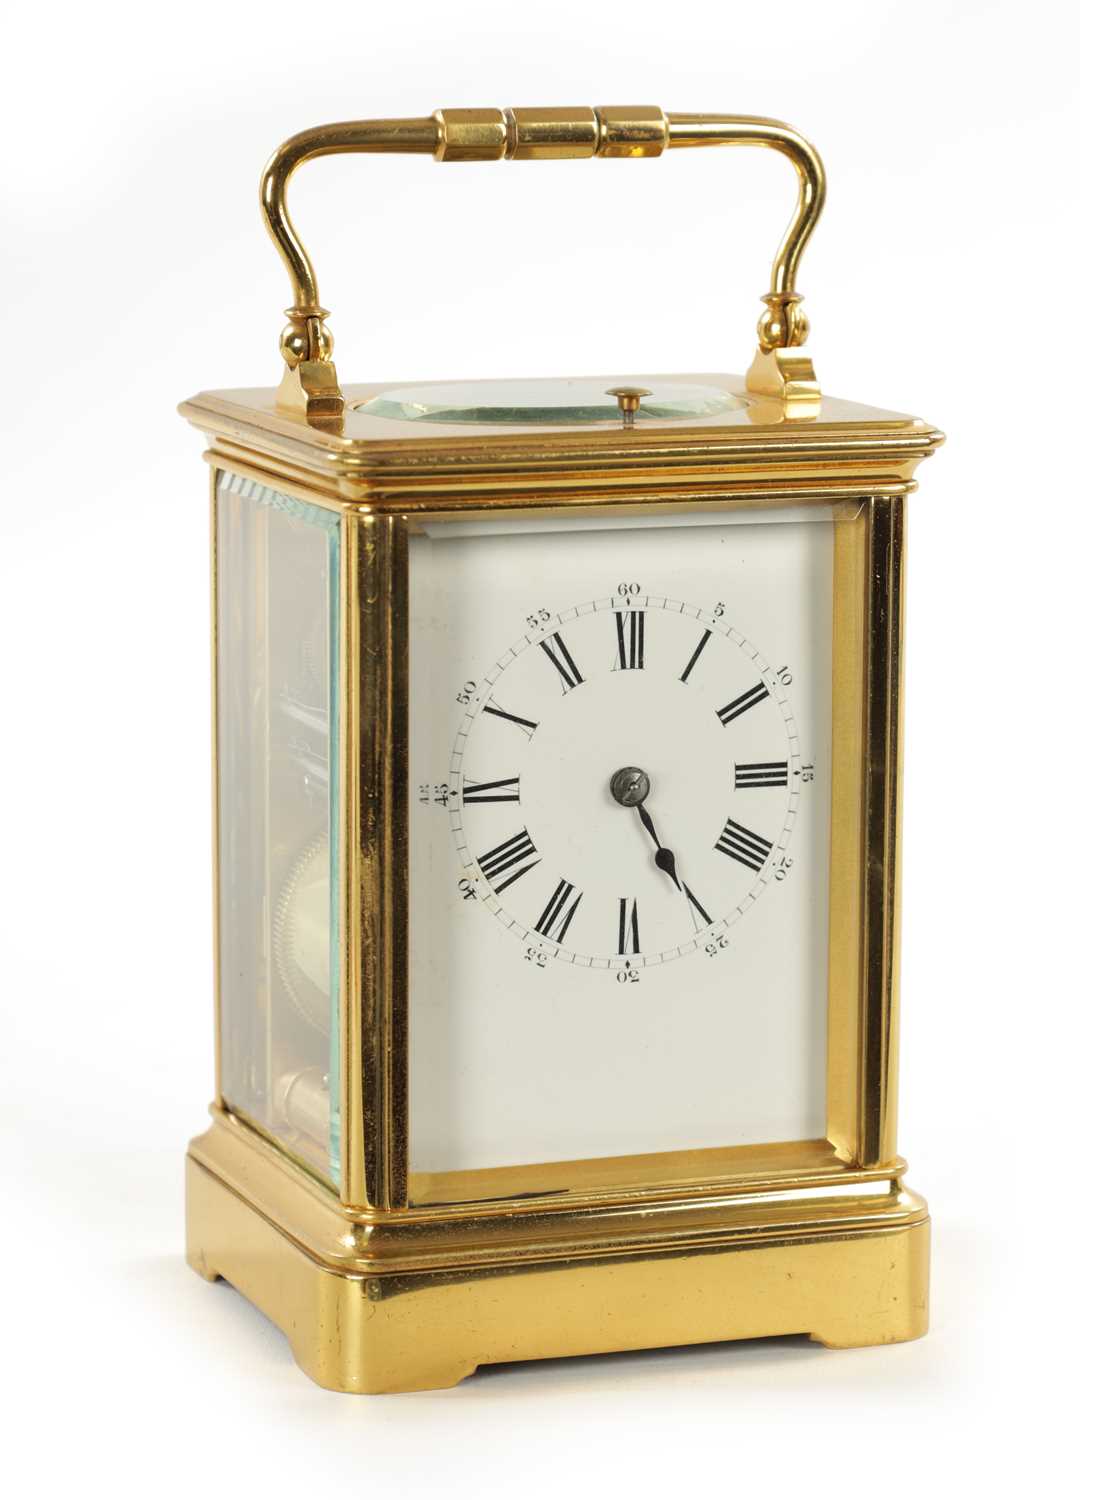 Lot 1214 - A LATE 19TH CENTURY FRENCH GRAND SONNERIE REPEATING CARRIAGE CLOCK